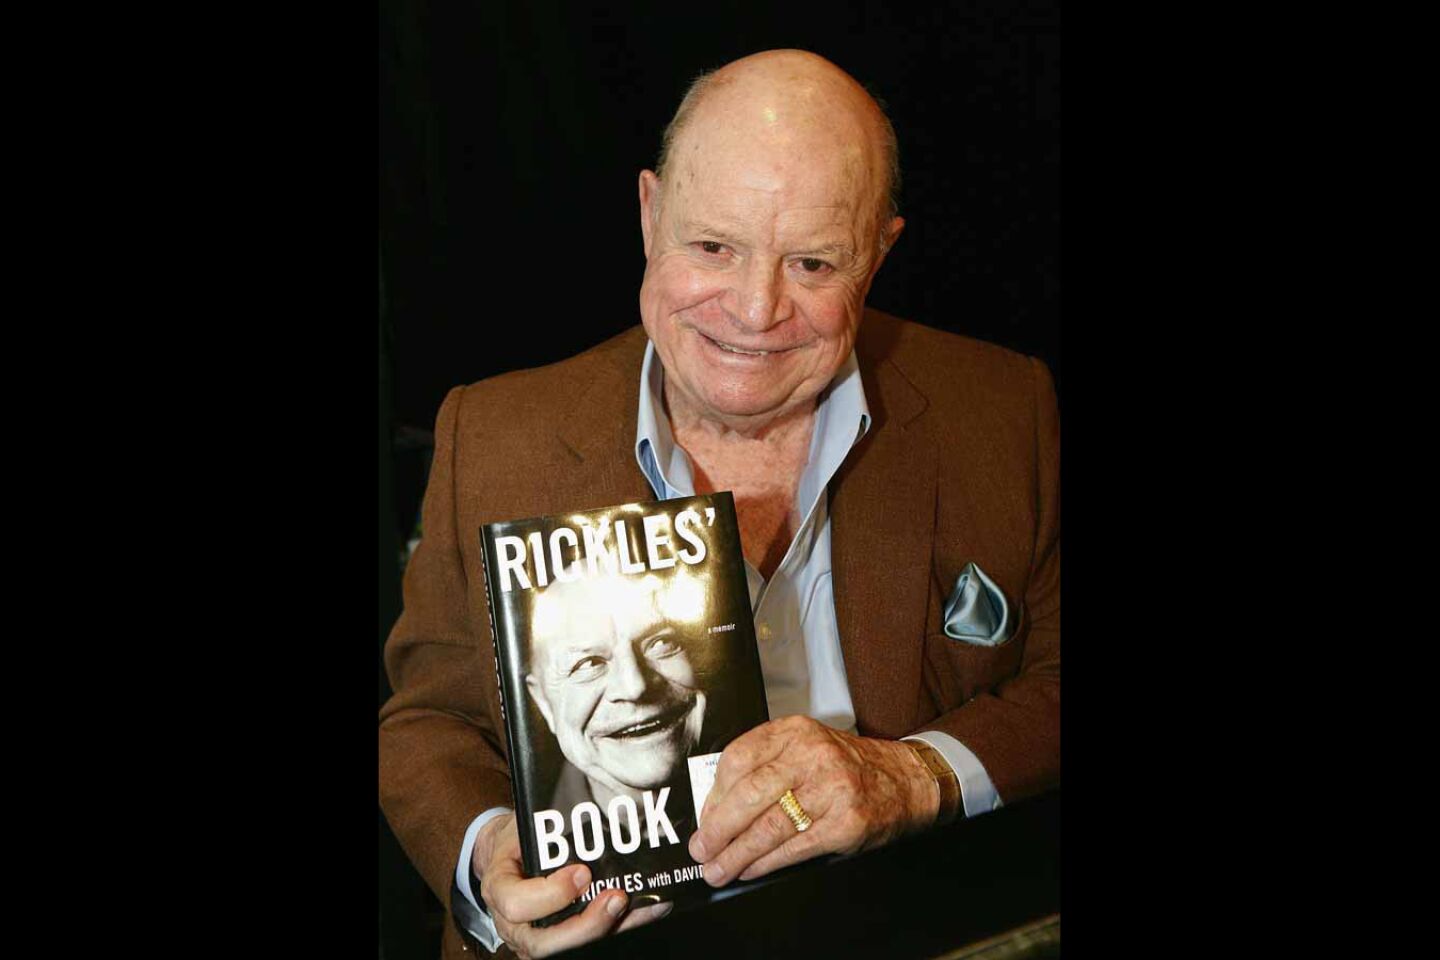 Rickles poses before signing copies of his new book ''Rickle's Book'' at Book Soup on May 31, 2007, in West Hollywood, Calif.